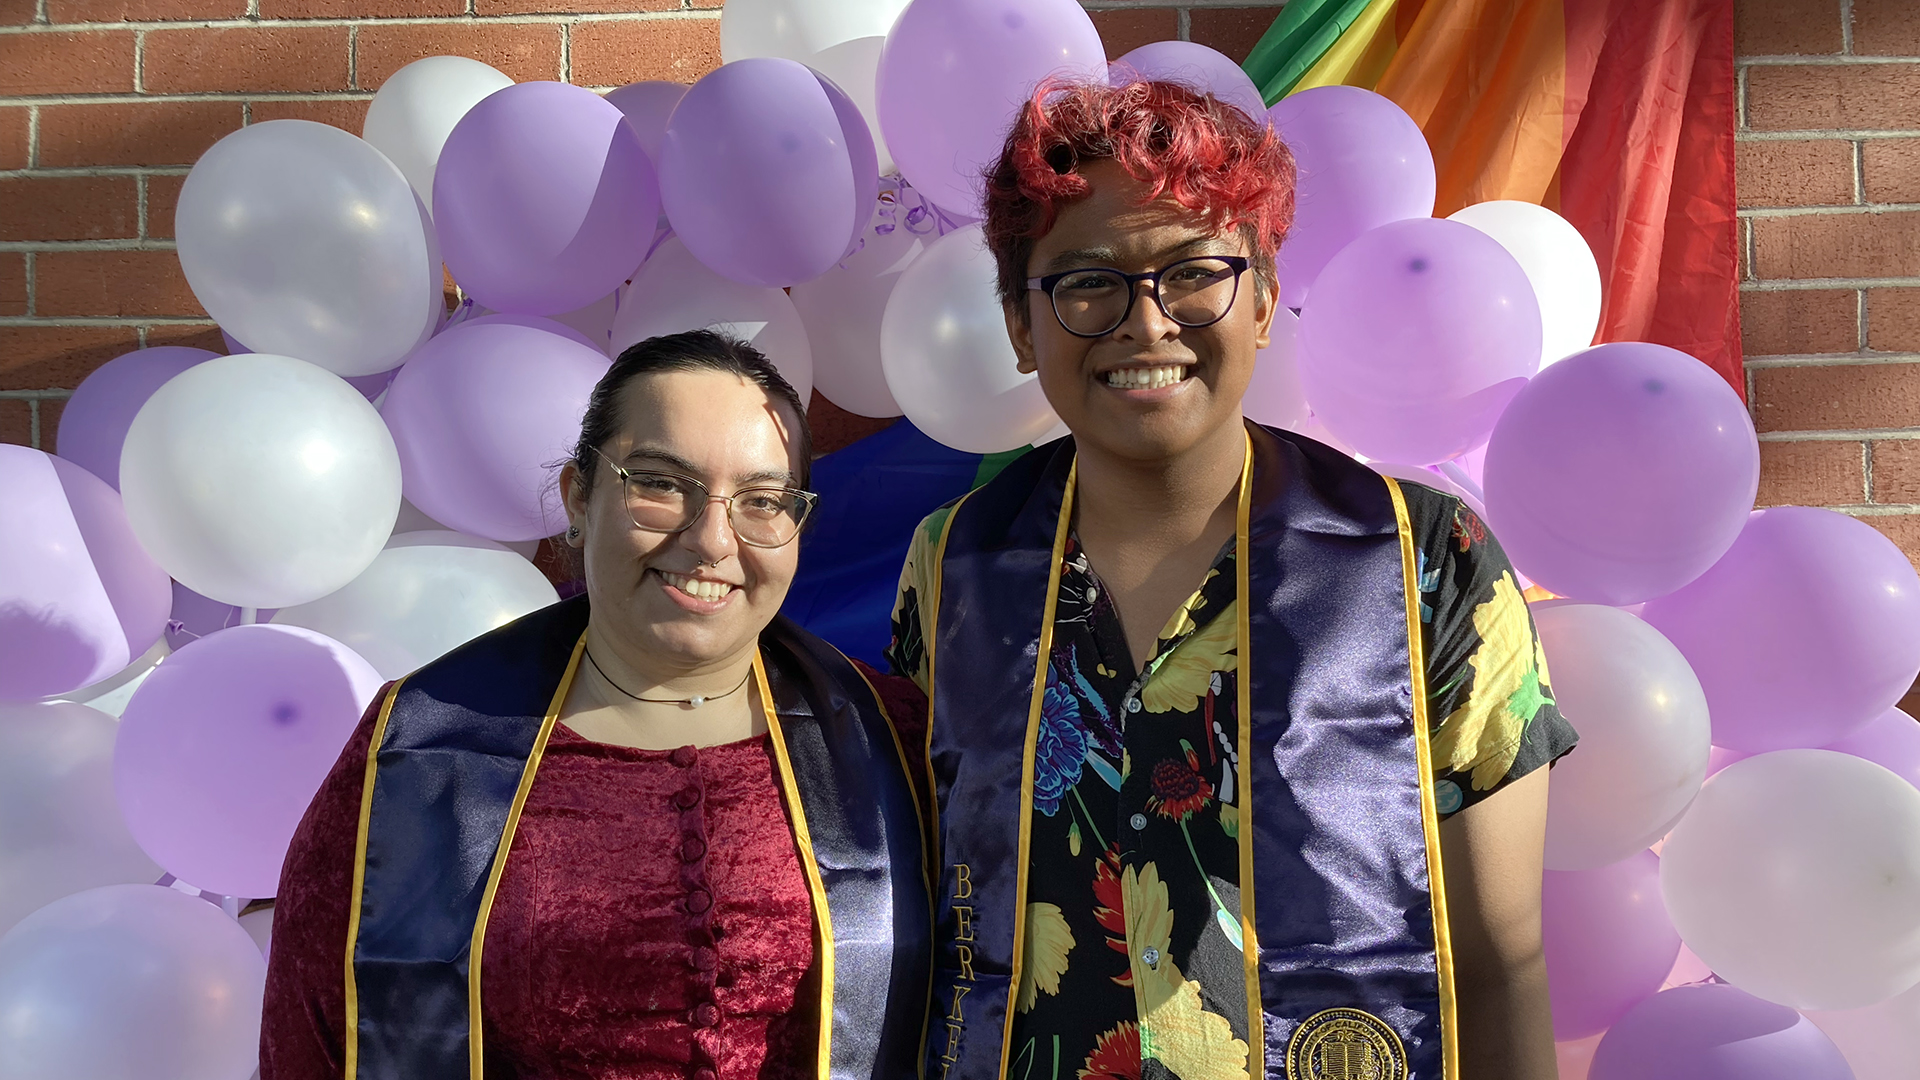 Two graduating students pose together with purple and white balloons and a rainbow flag behind them